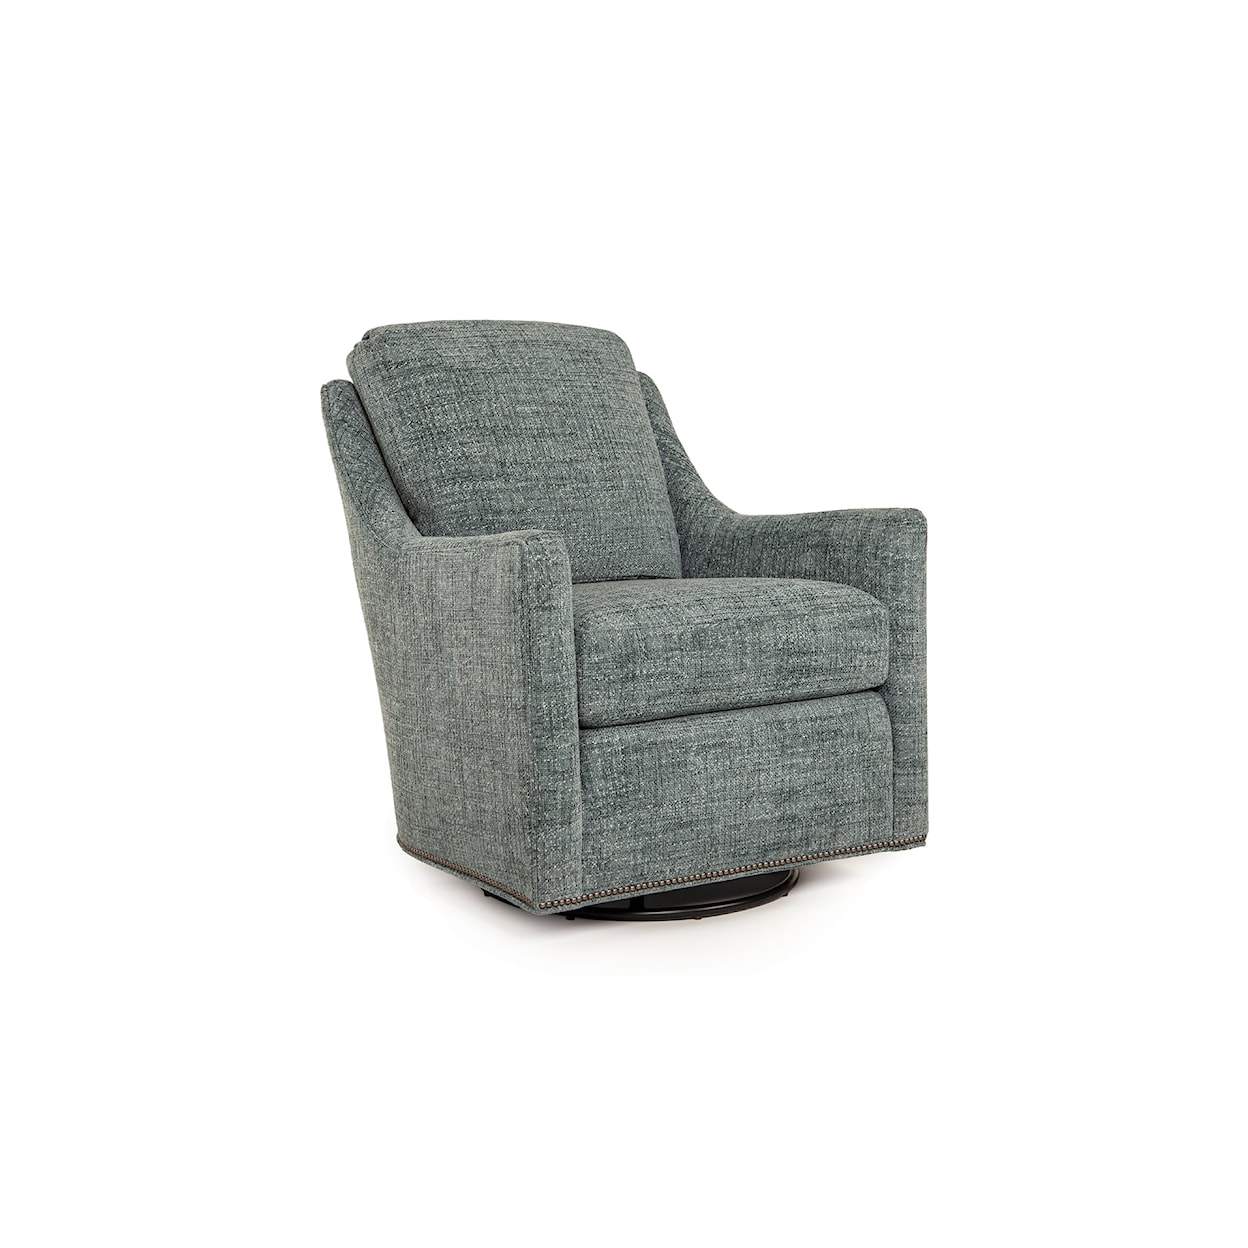 Smith Brothers 560 Swivel Chair